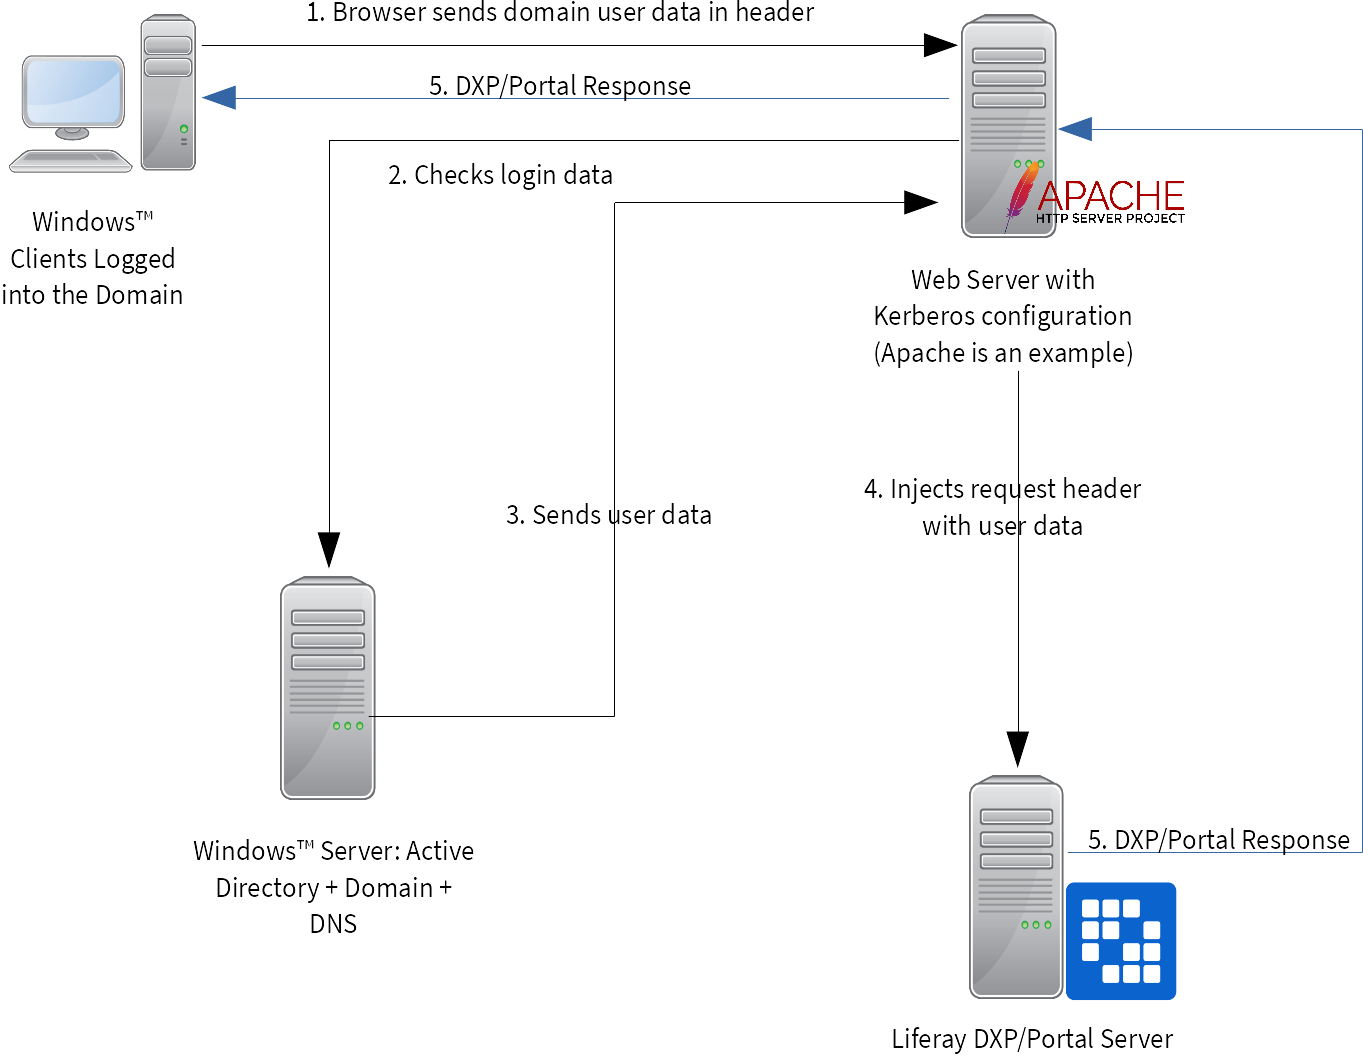 Kerberos authentication requires a web server in front of your Liferay DXP server.